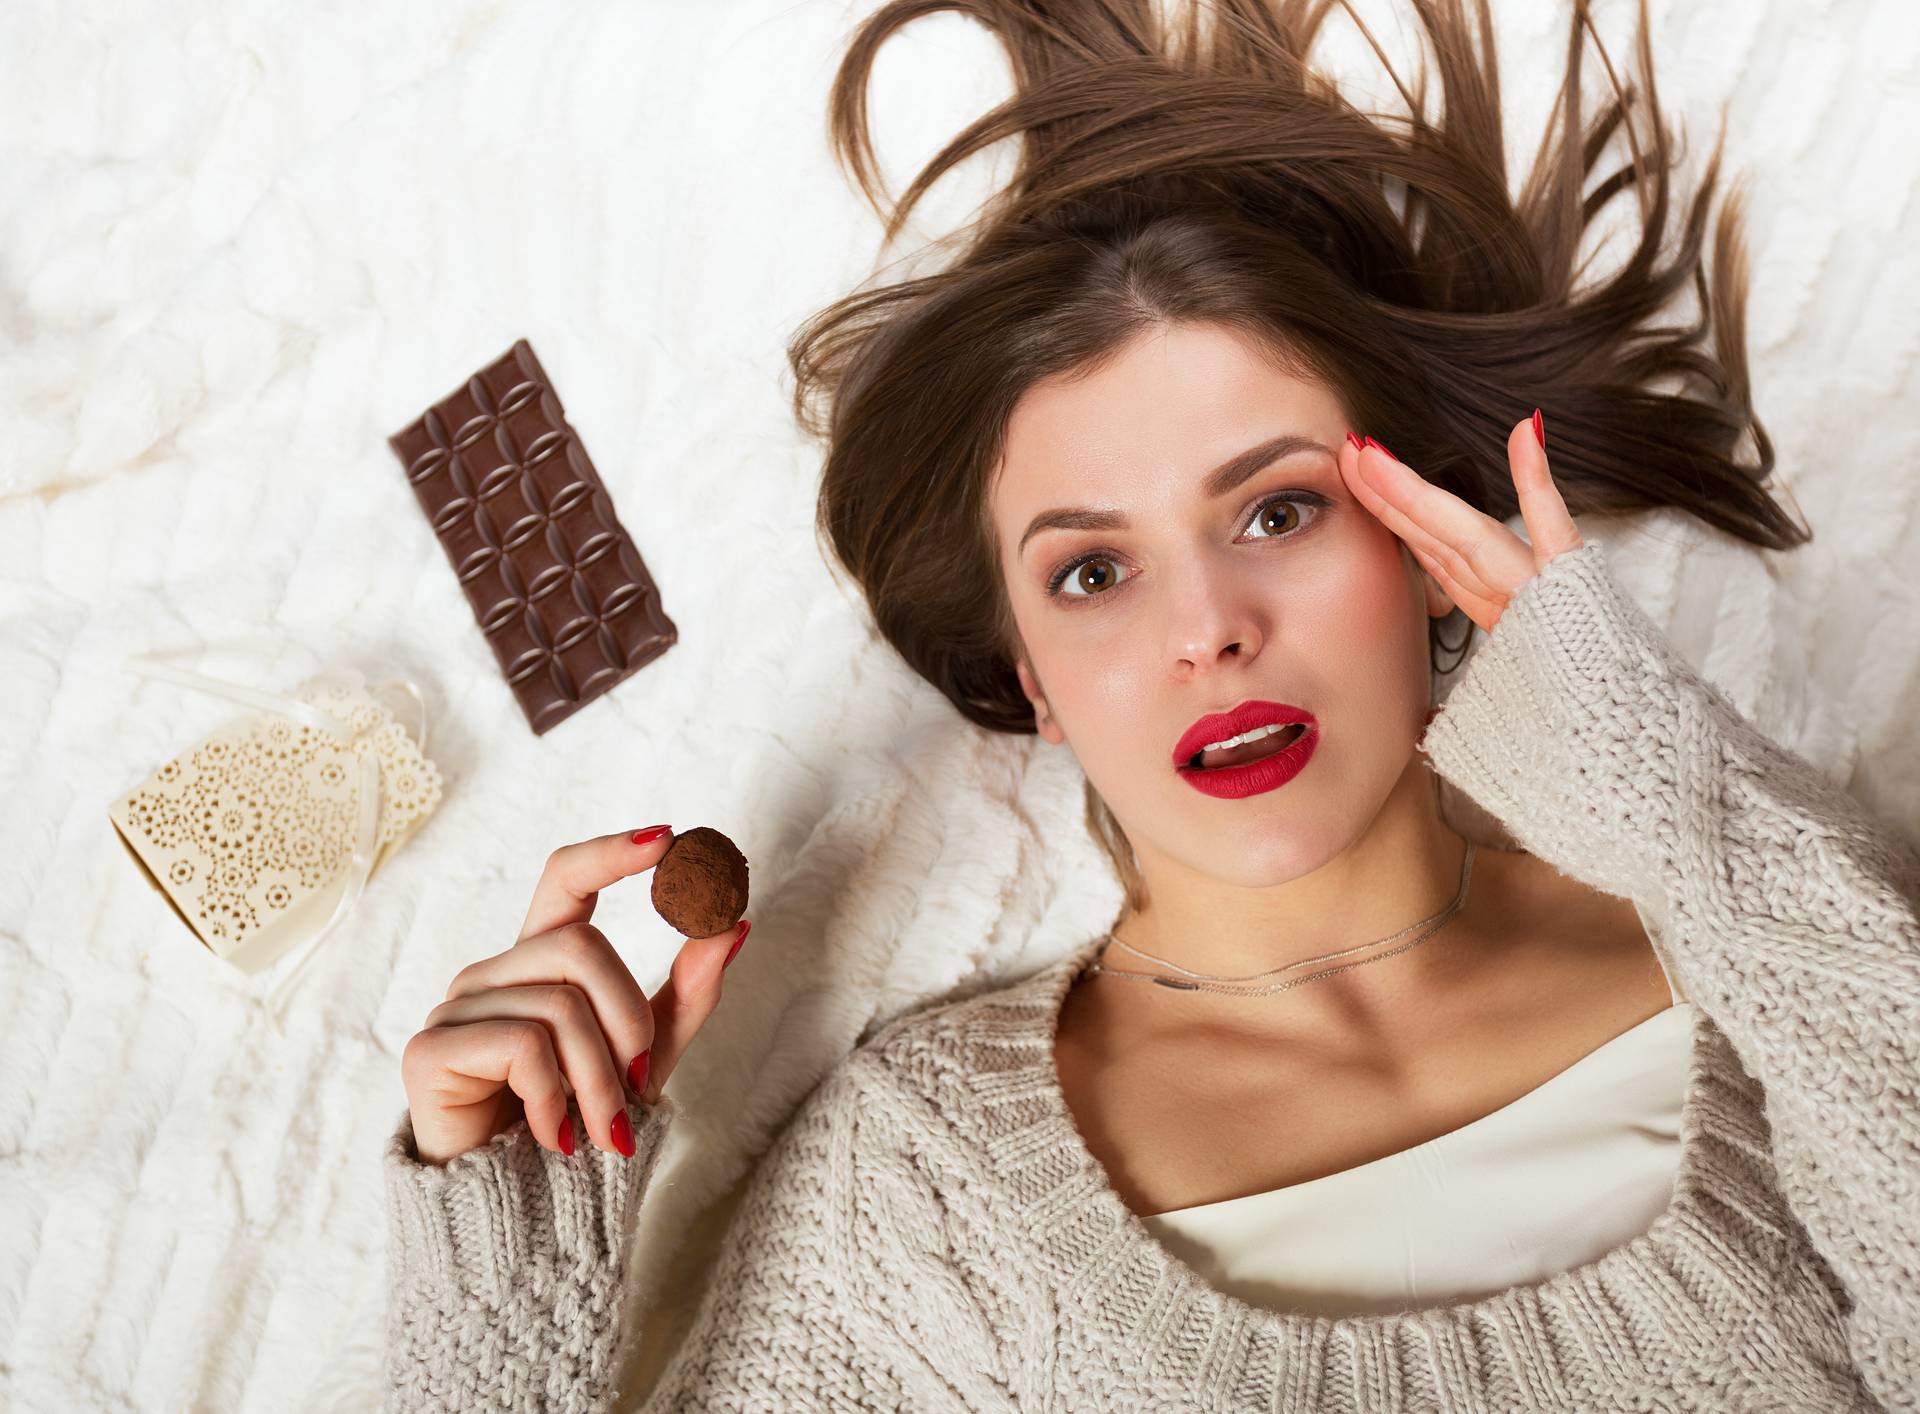 Woman with a chocolate